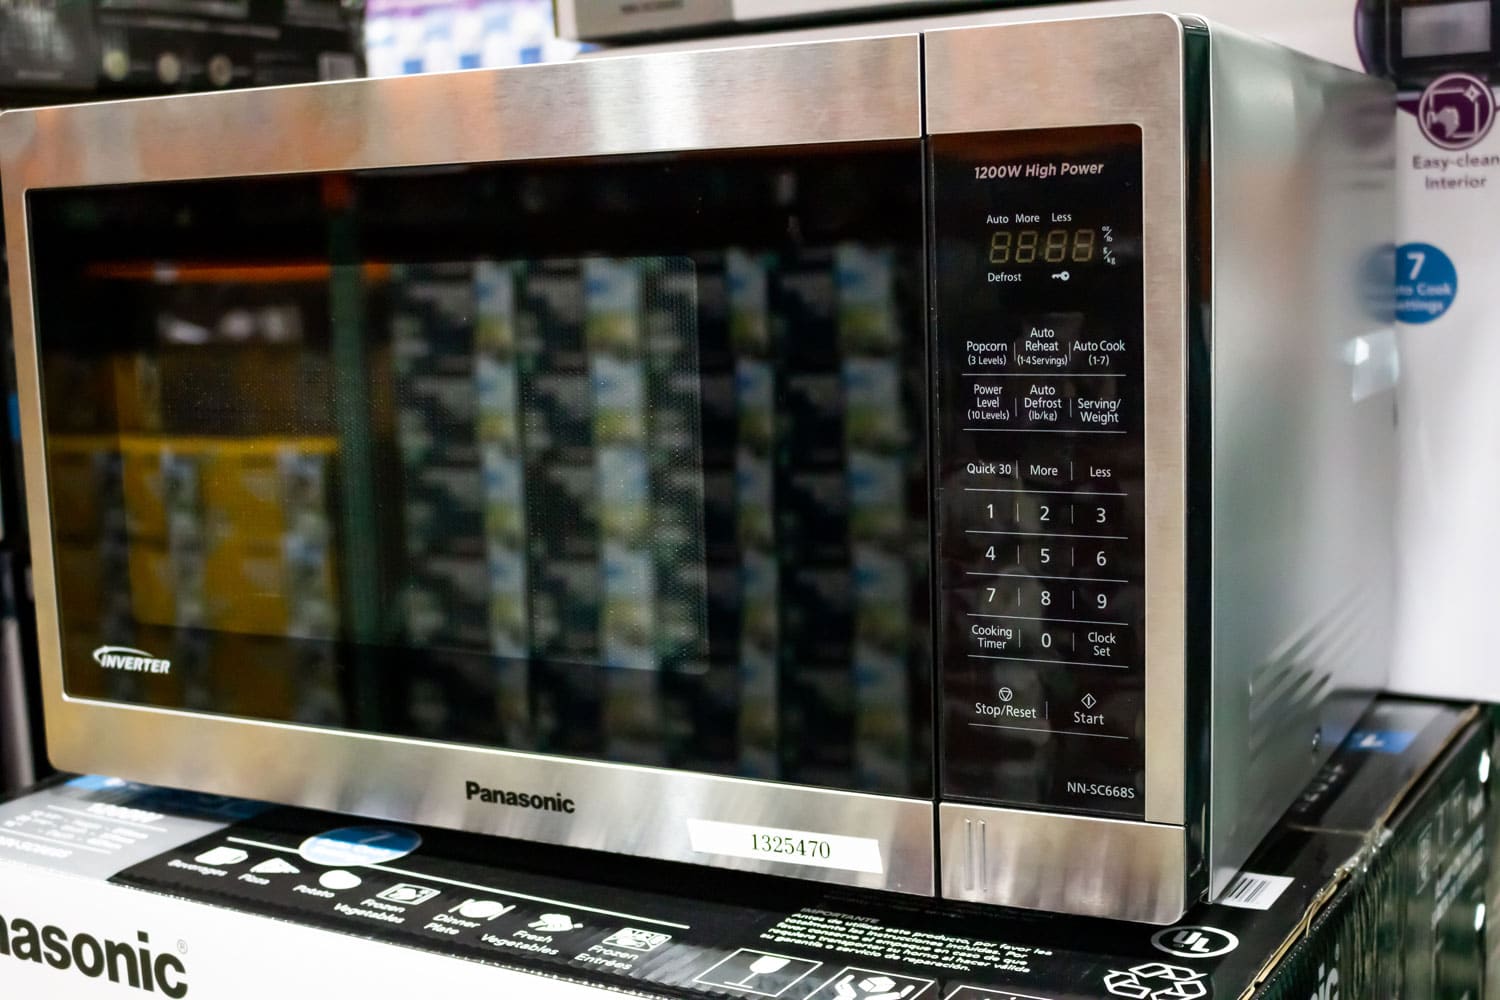 A view of a Panasonic Inverter microwave on display at a local department store.